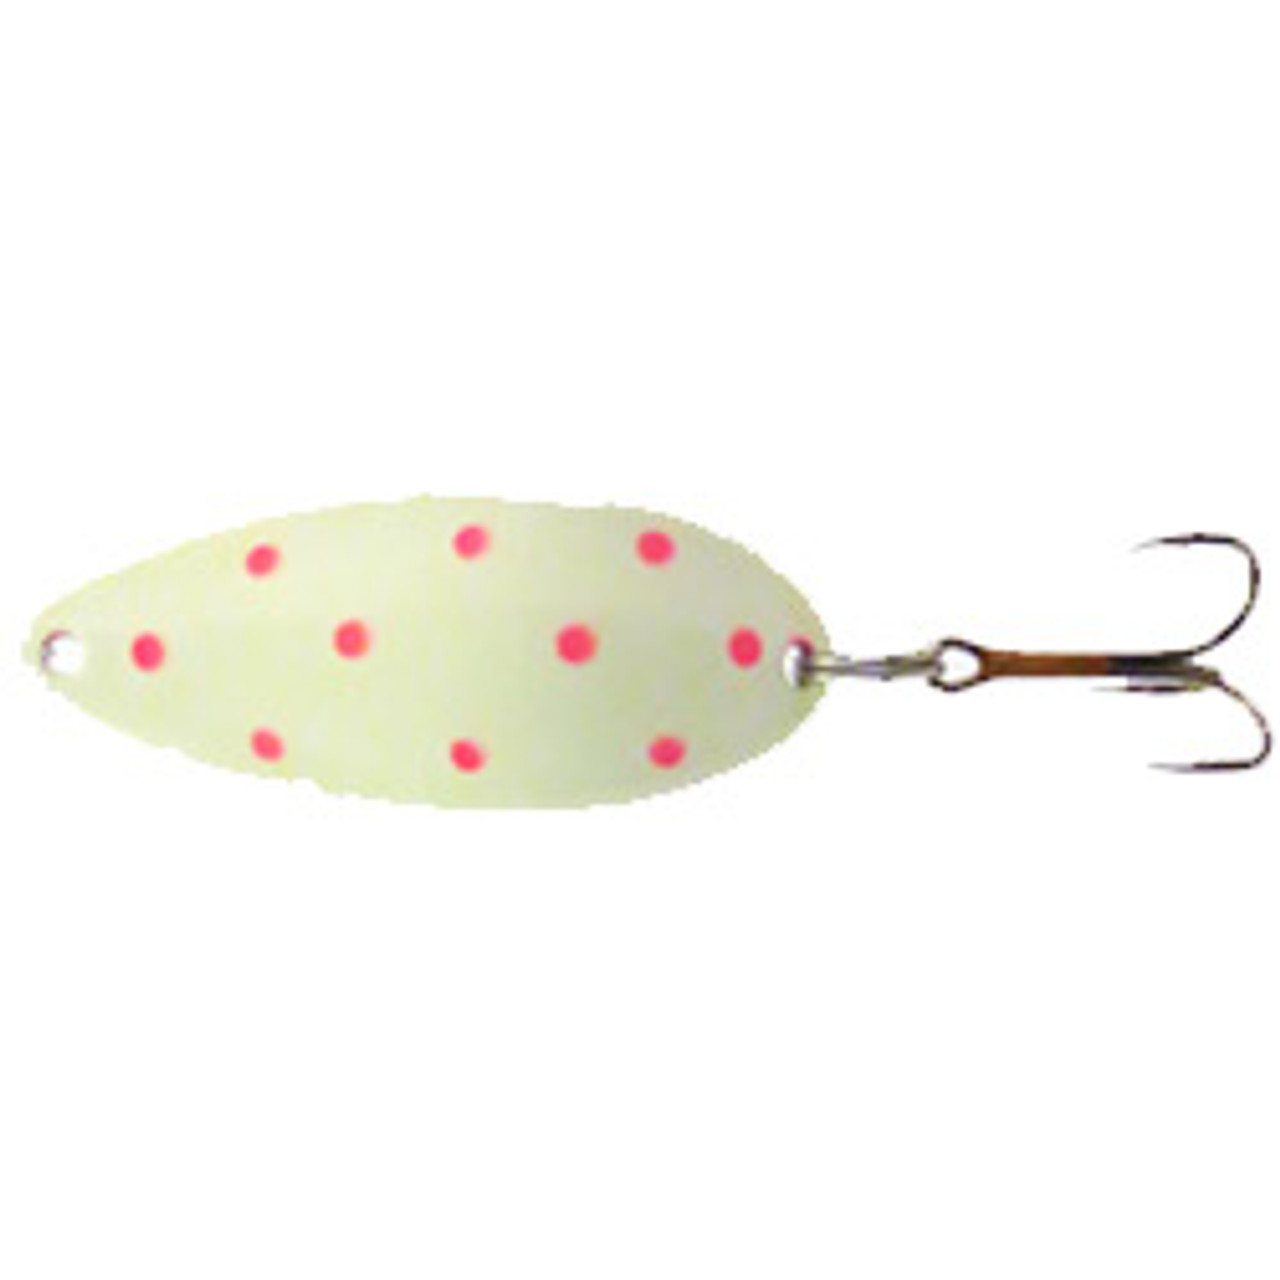 Lightning 5/8 oz Spoon by Double x Tackle